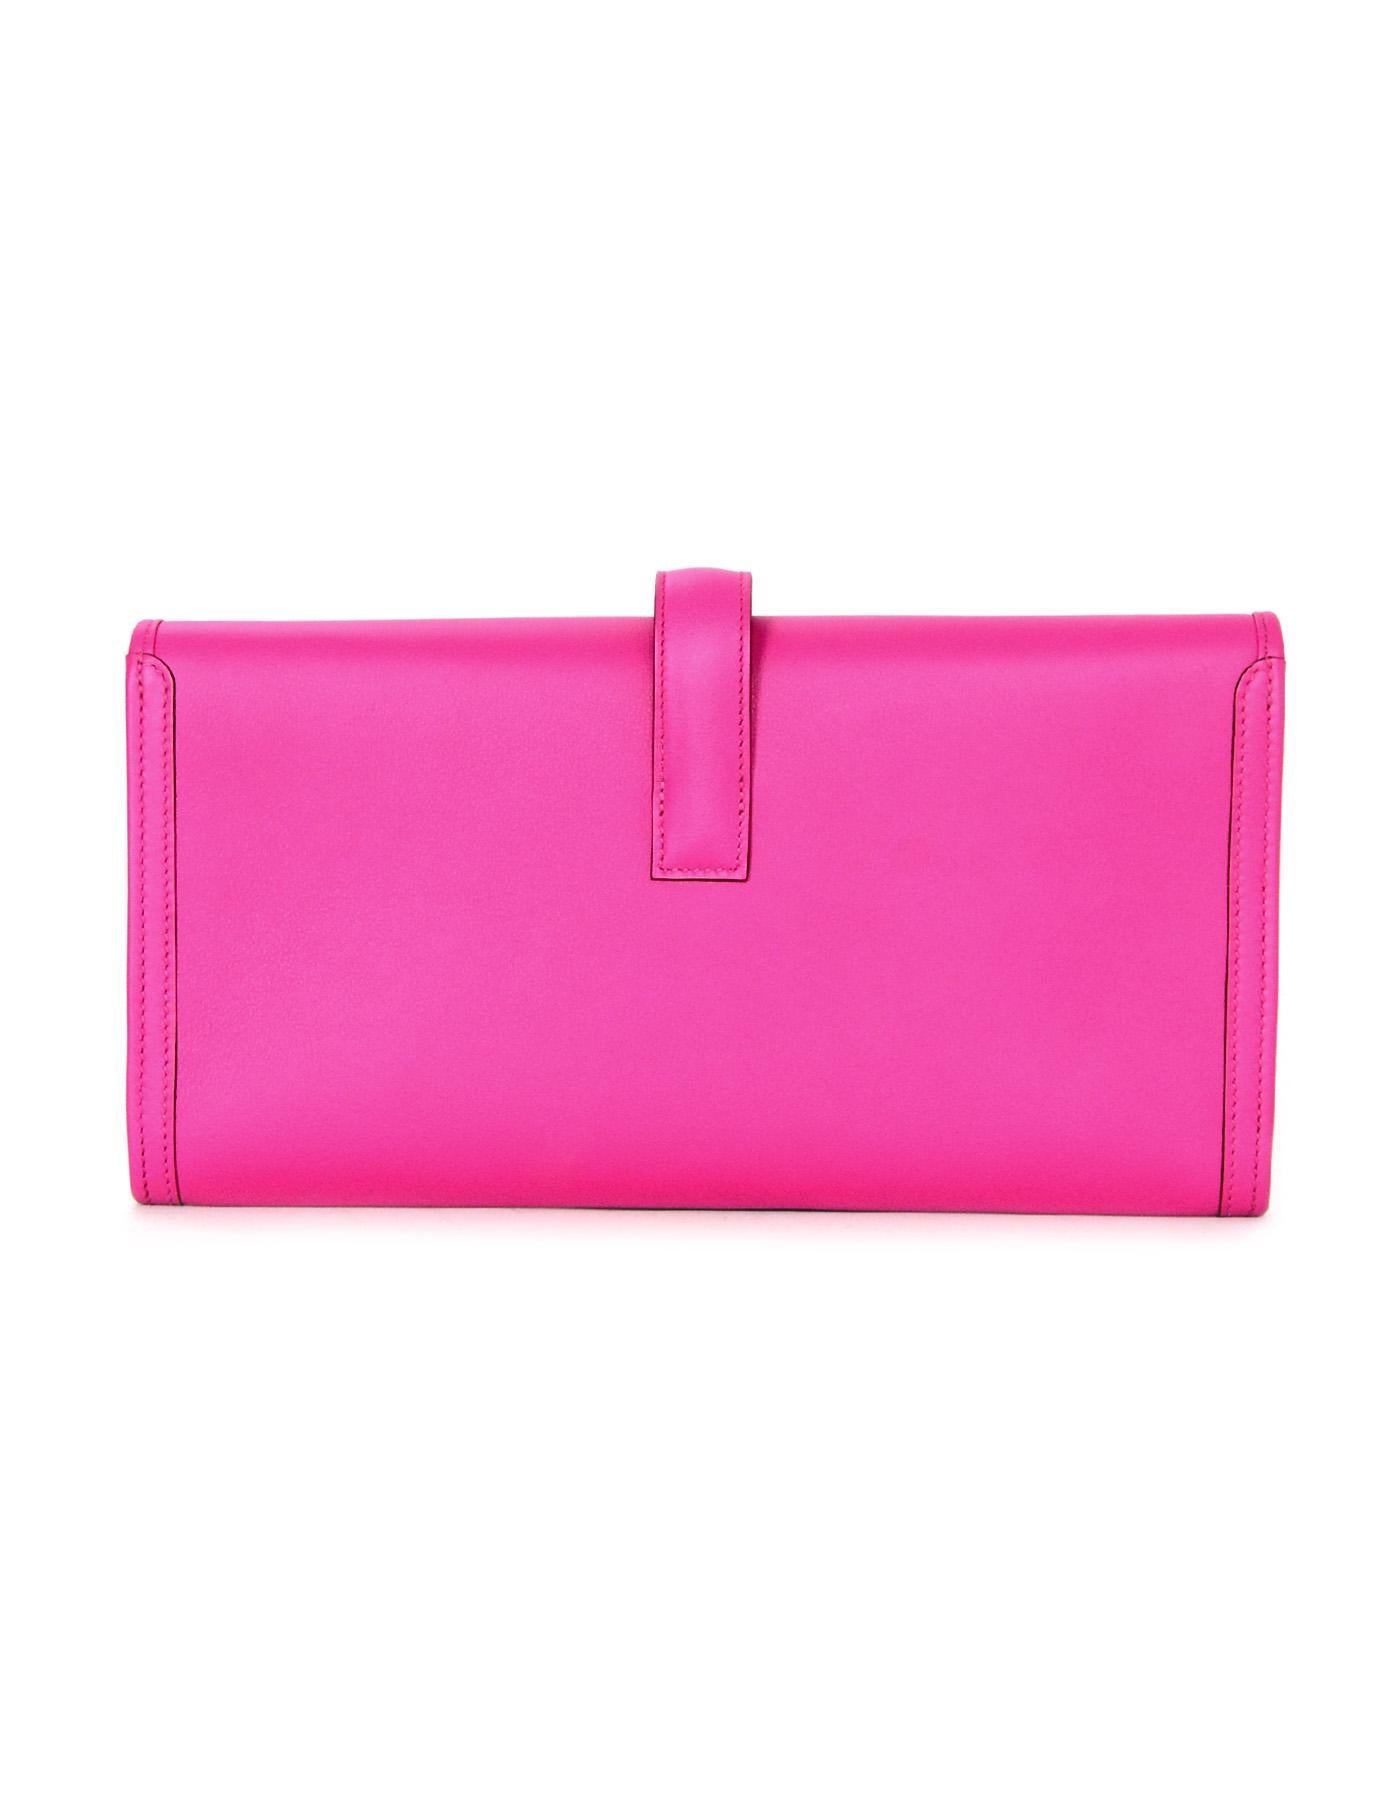 Hermes 2018 Magnolia Pink Swift Leather Jige Elan 29cm H Envelope Clutch Bag In Excellent Condition In New York, NY